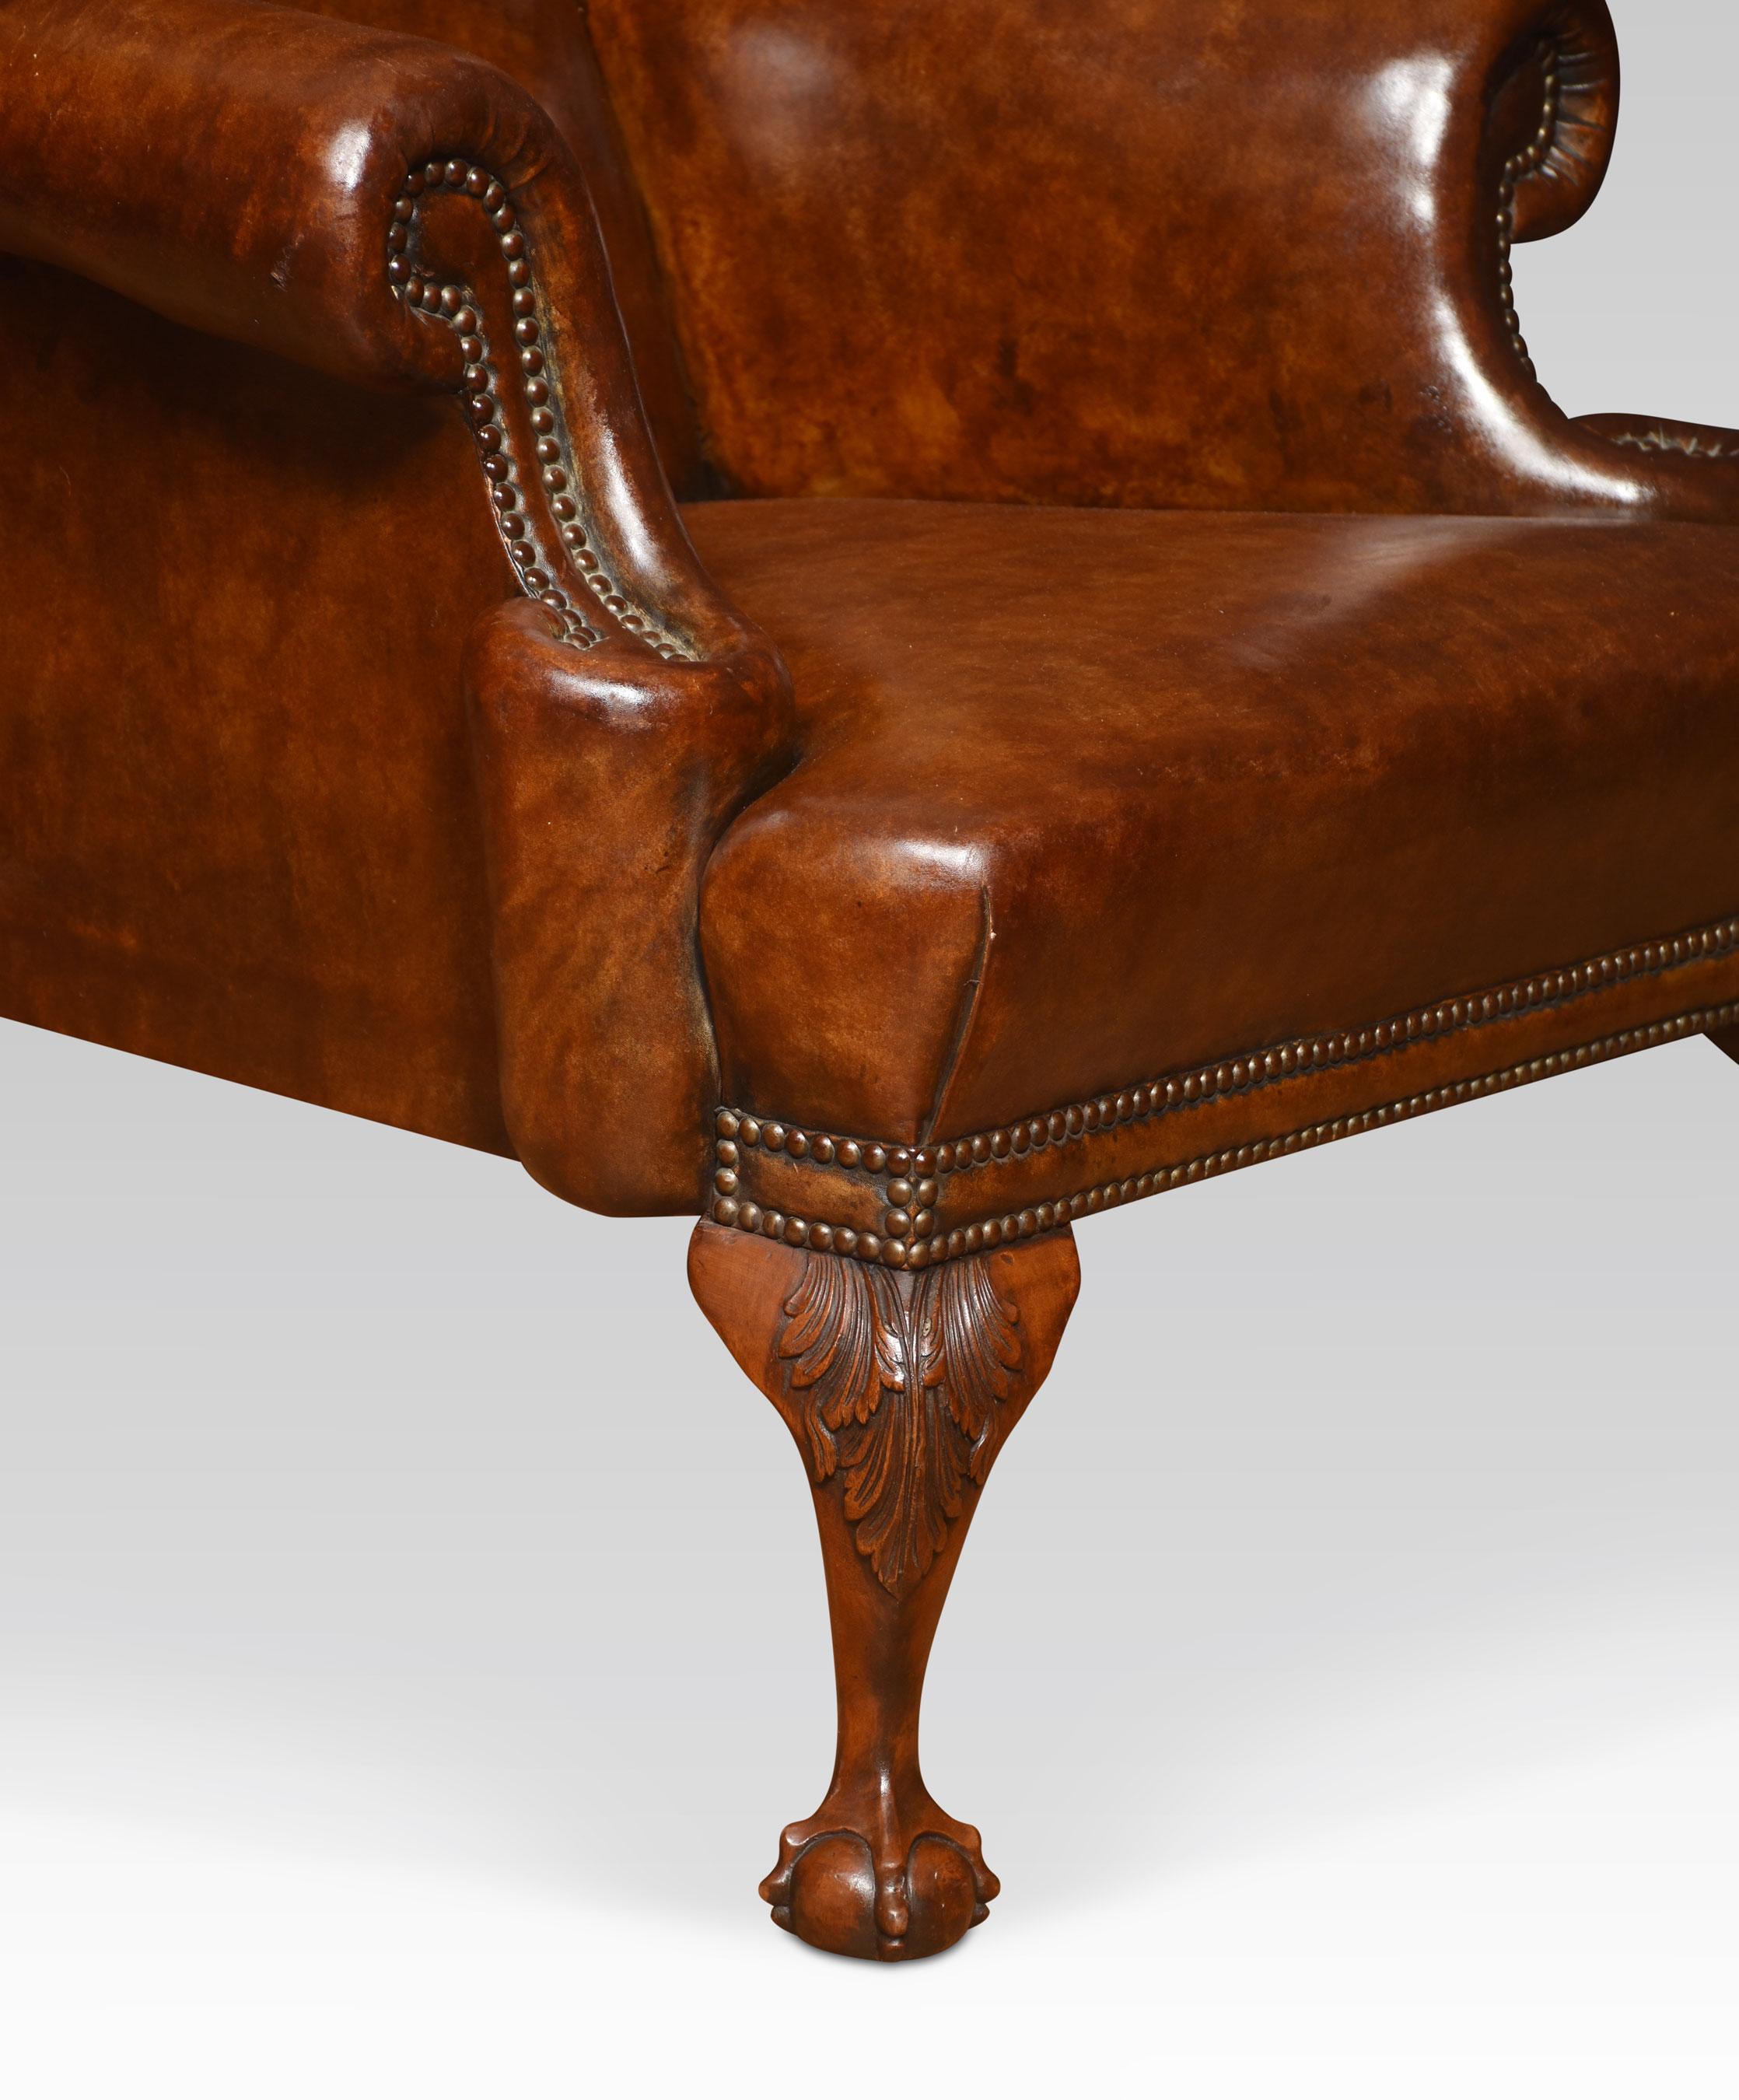 A Georgian-style armchair, the winged back and seat upholstered in brown leather, flanked by out swept arms. All raised up on cabriole front sports terminating in claw and ball feet
Dimensions
Height 43.5 inches height to seat 18 inches
Width 32